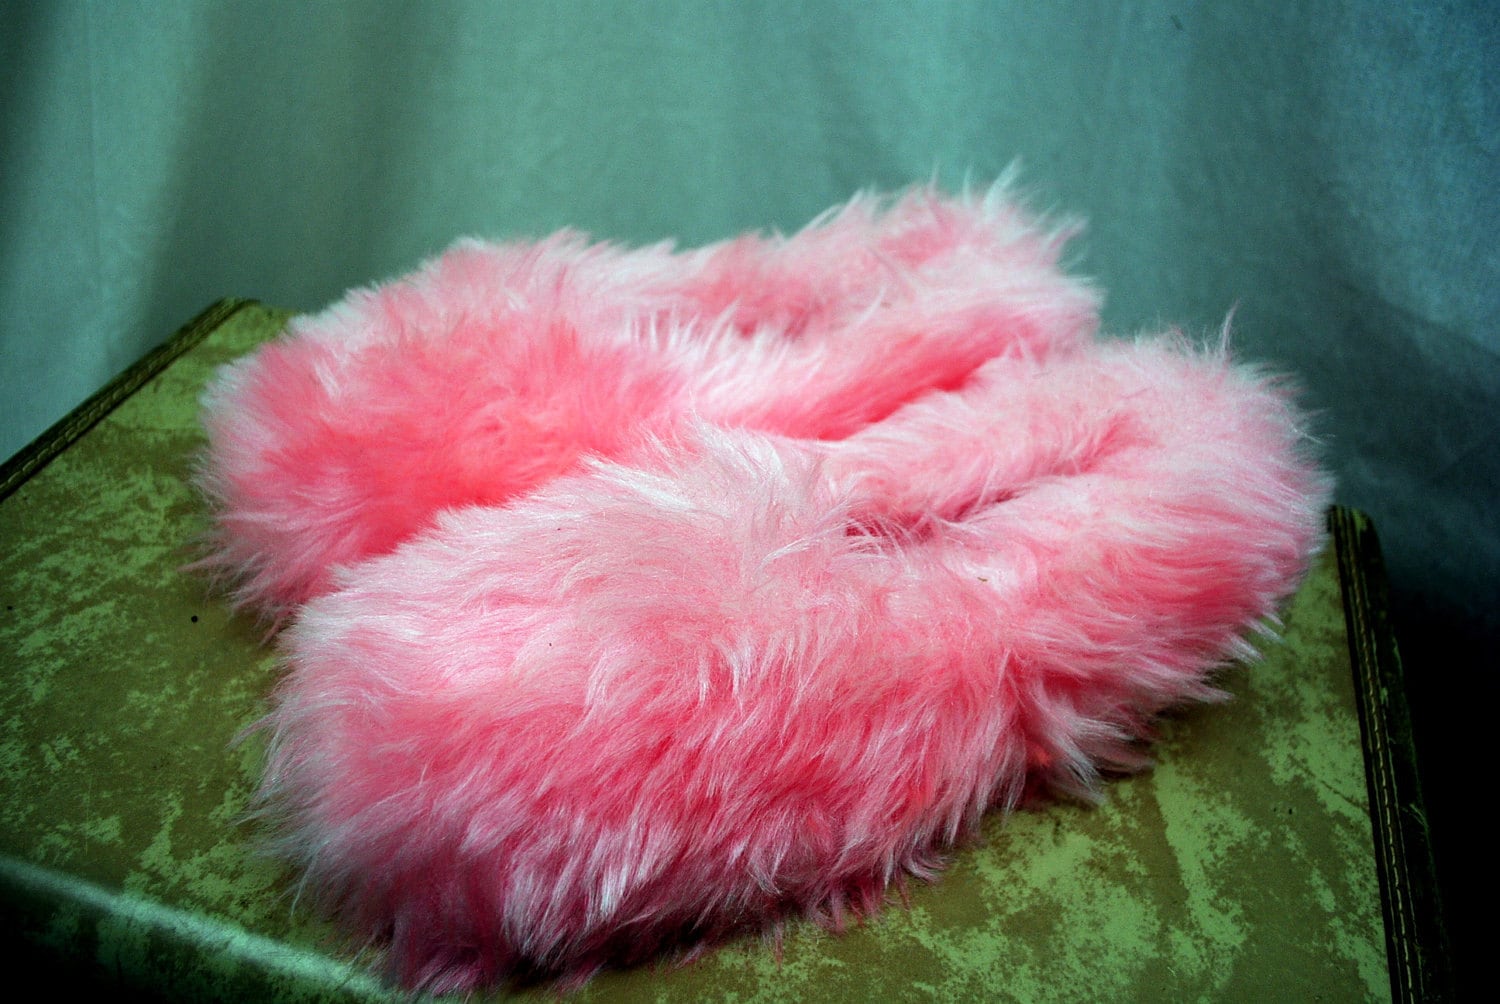 Amazing PINK Fuzzy Sioux Mox Moccasin Slipper Shoes